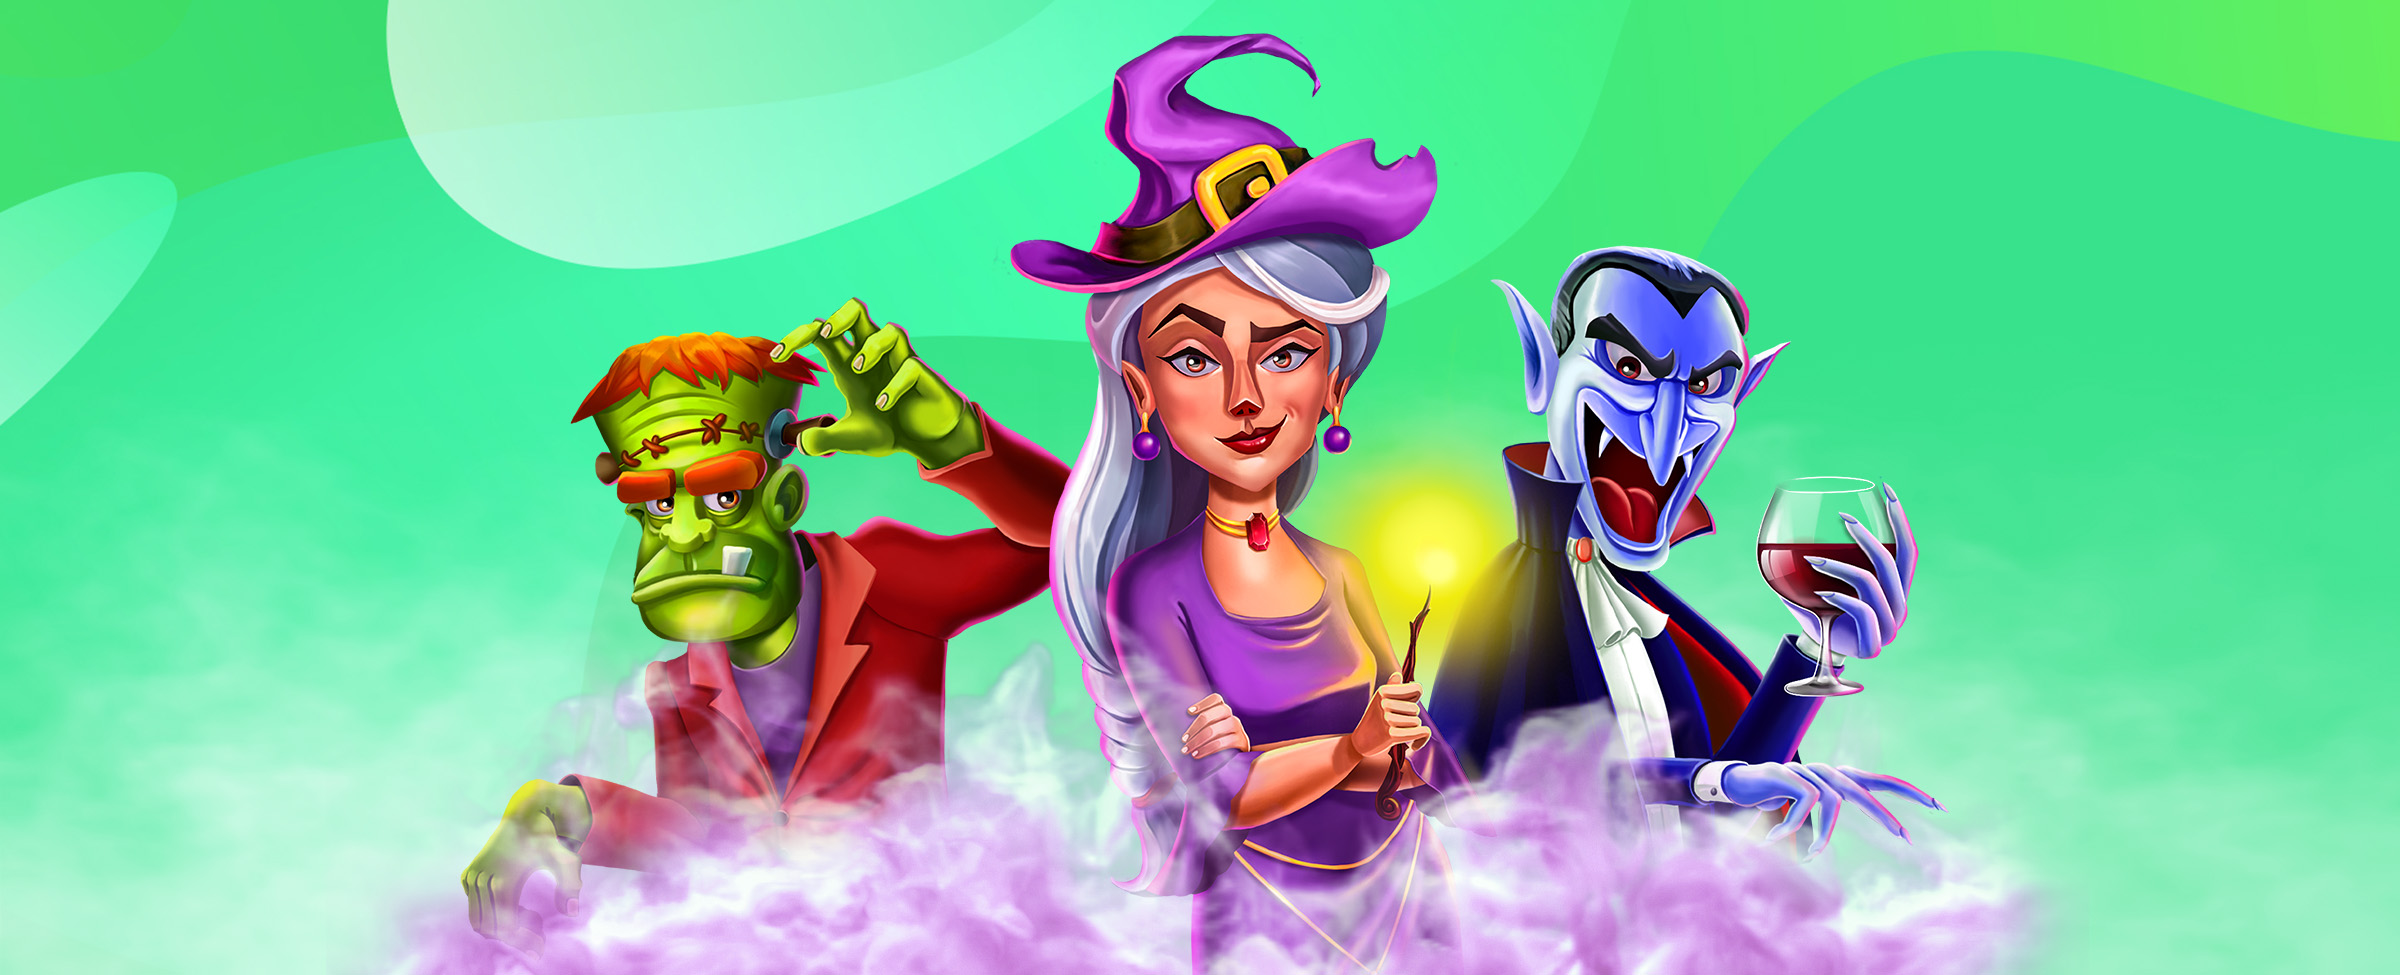 Cartoon game characters from the Monster Manor slot at SlotsLV standing in a puff of smoke, featuring a witch, frankenstein and dracula